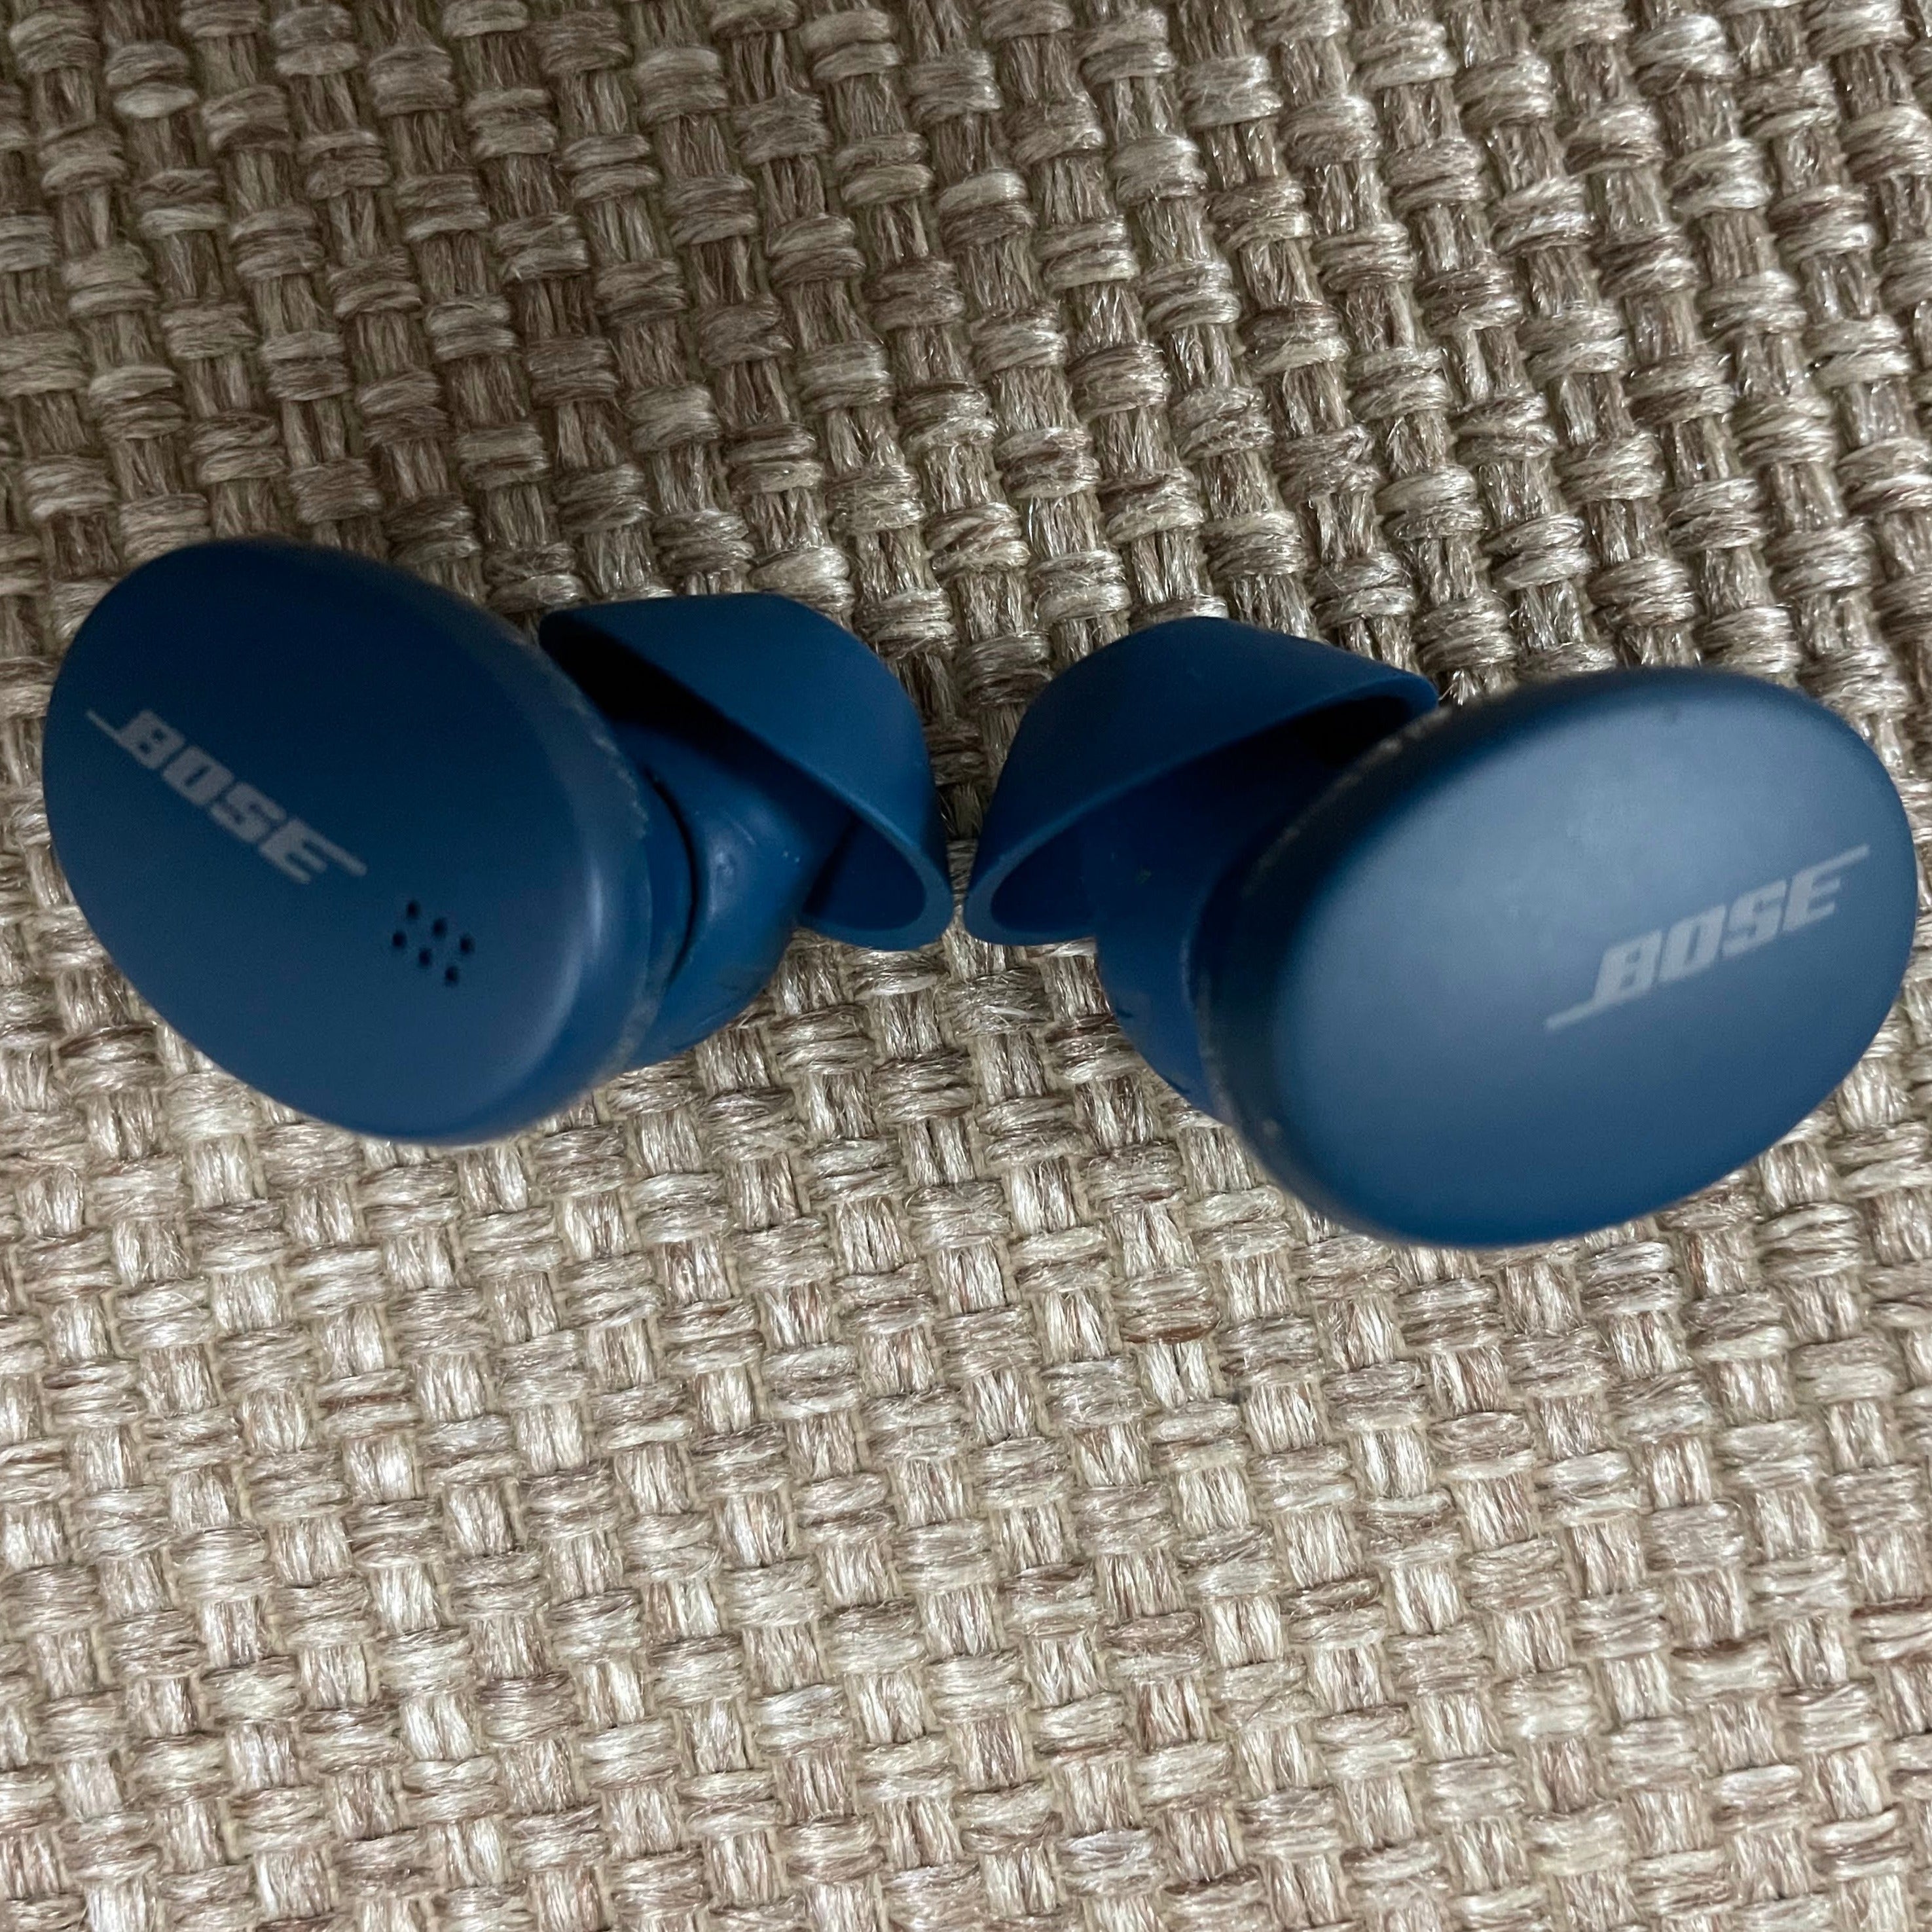 Bose - SoundSport (Pre-Owned)